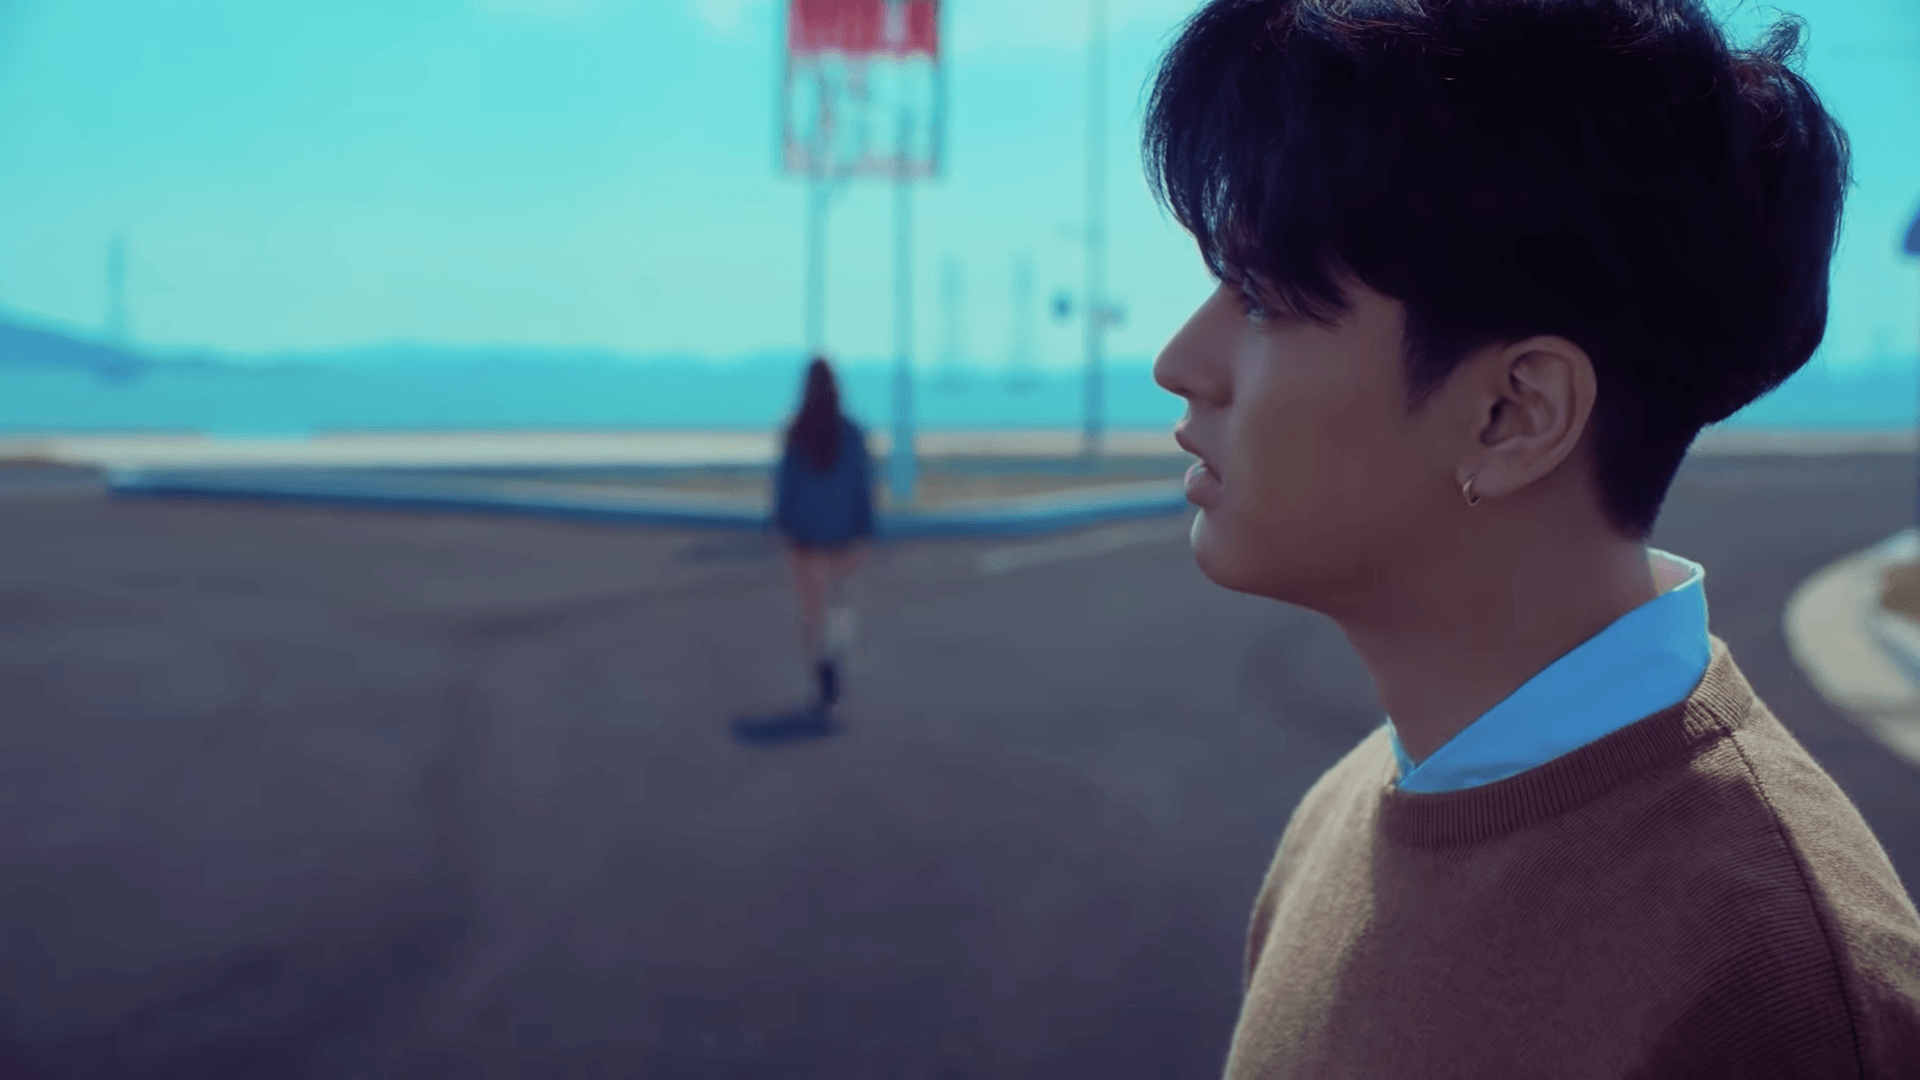 iKon's “Goodbye Road” is Paved with Tried and True Tropes